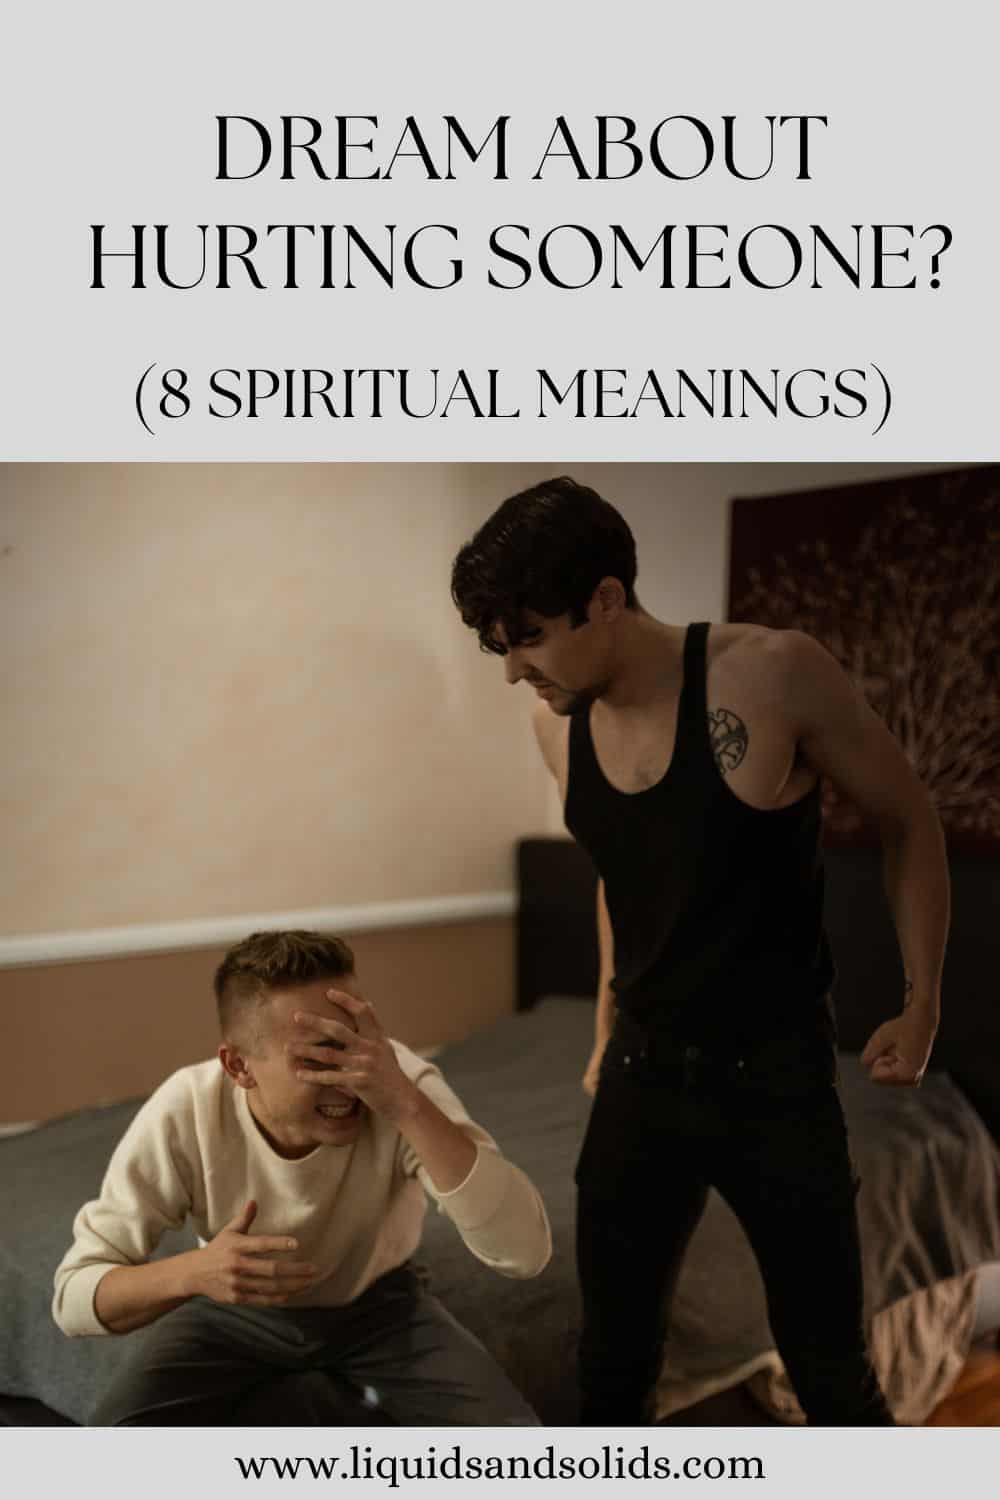 Dream About Hurting Someone? (8 Spiritual Meanings)